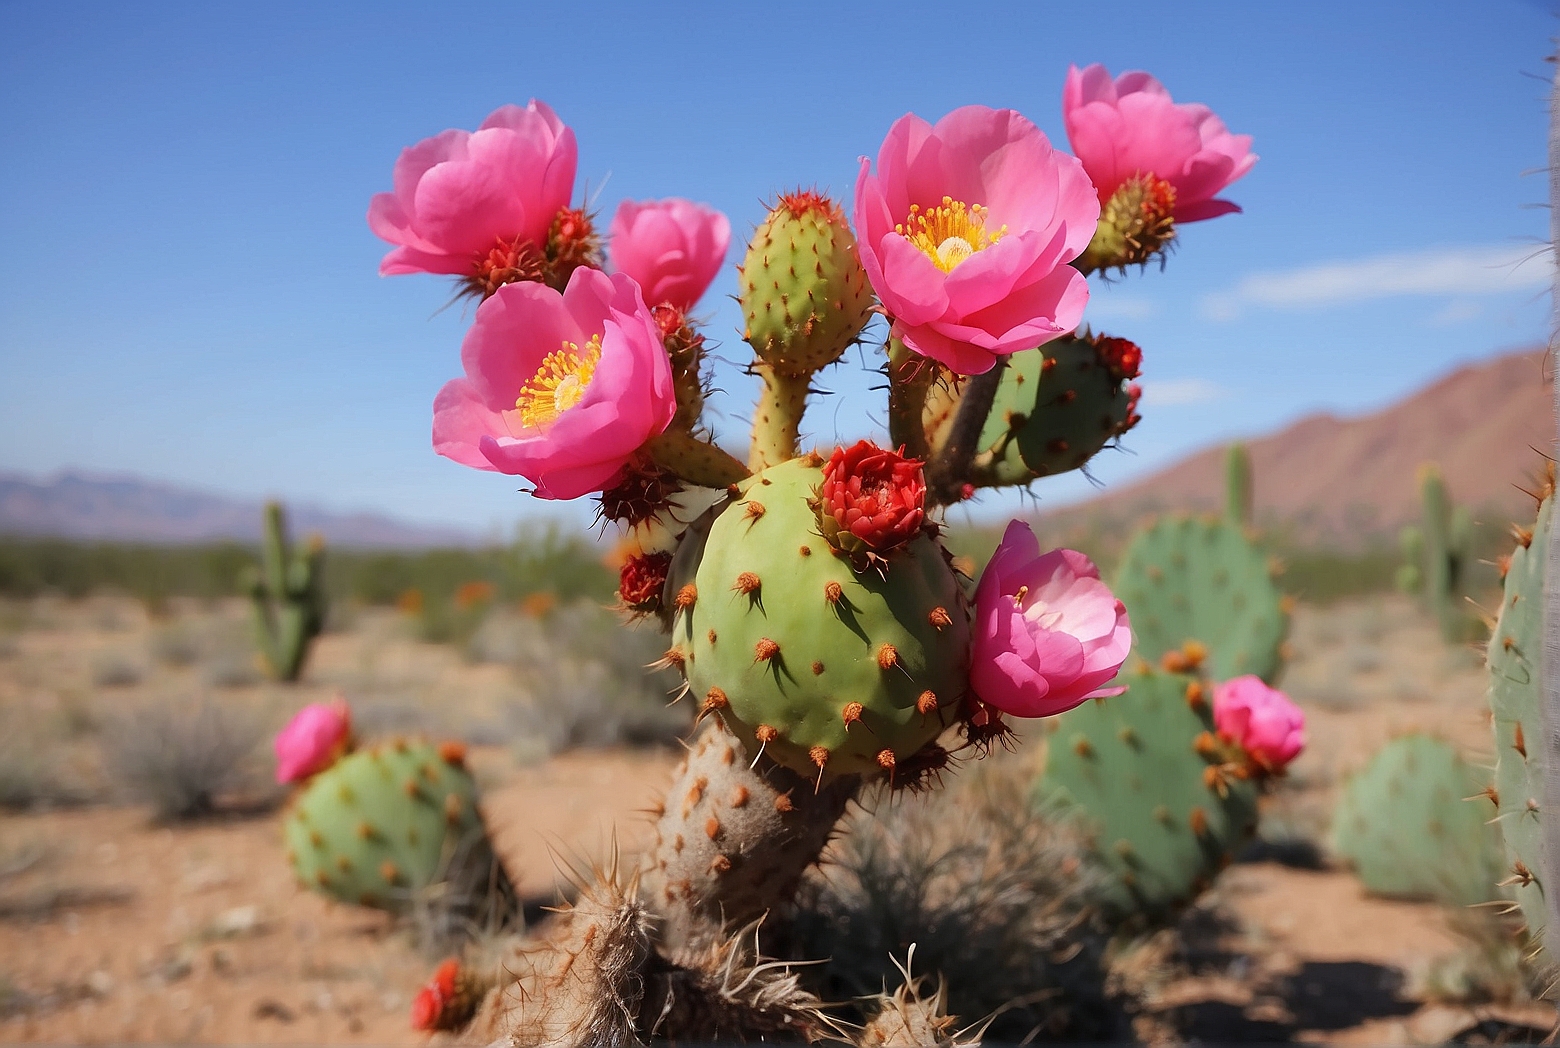 Are Prickly Pear Cactus Plant Edible?